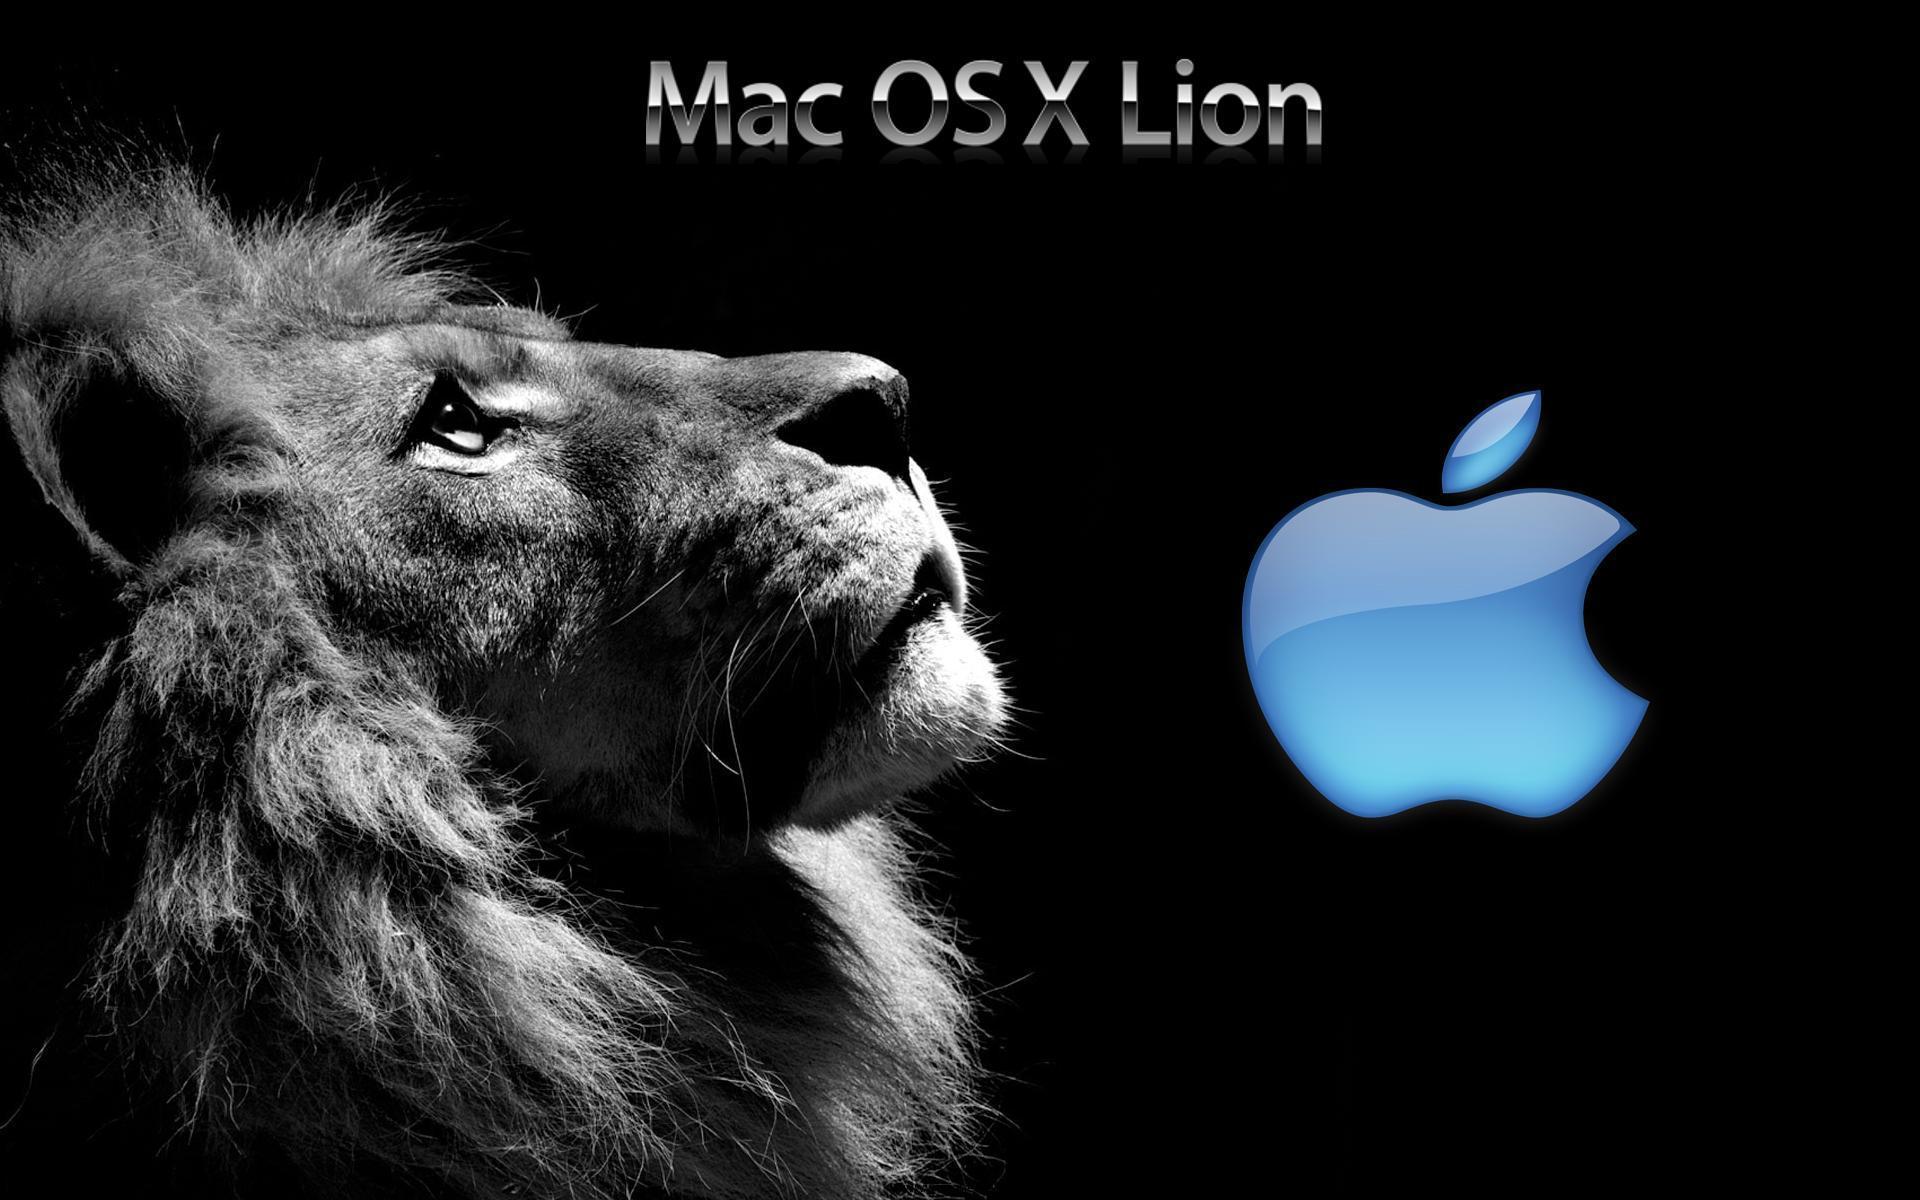 New Mac OS X Lion Wallpaper in HD for Free Download